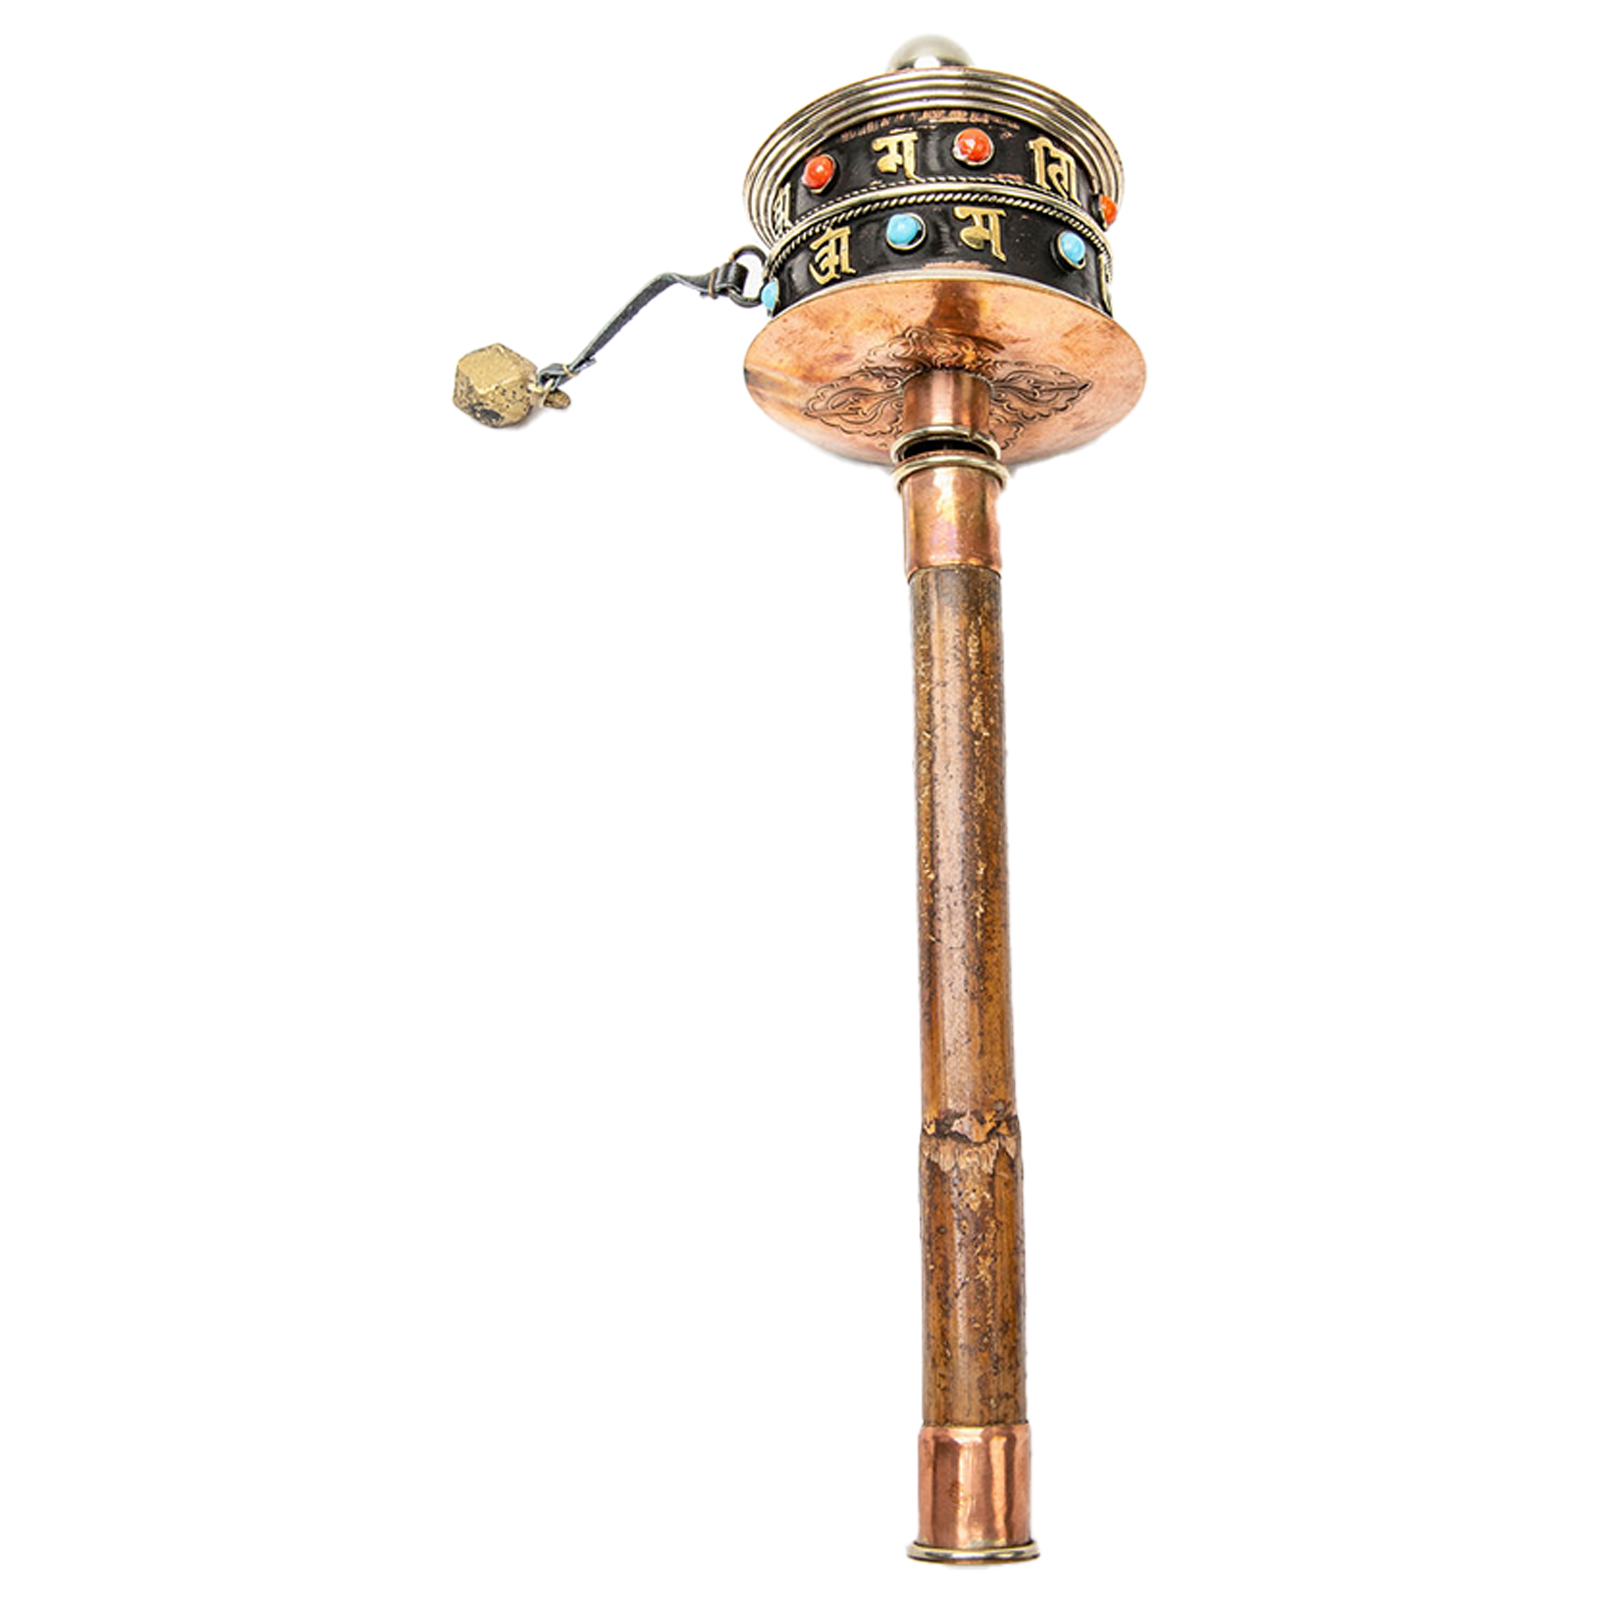 Underside perspective of big Handheld Prayer Wheel on a solid white backdrop.